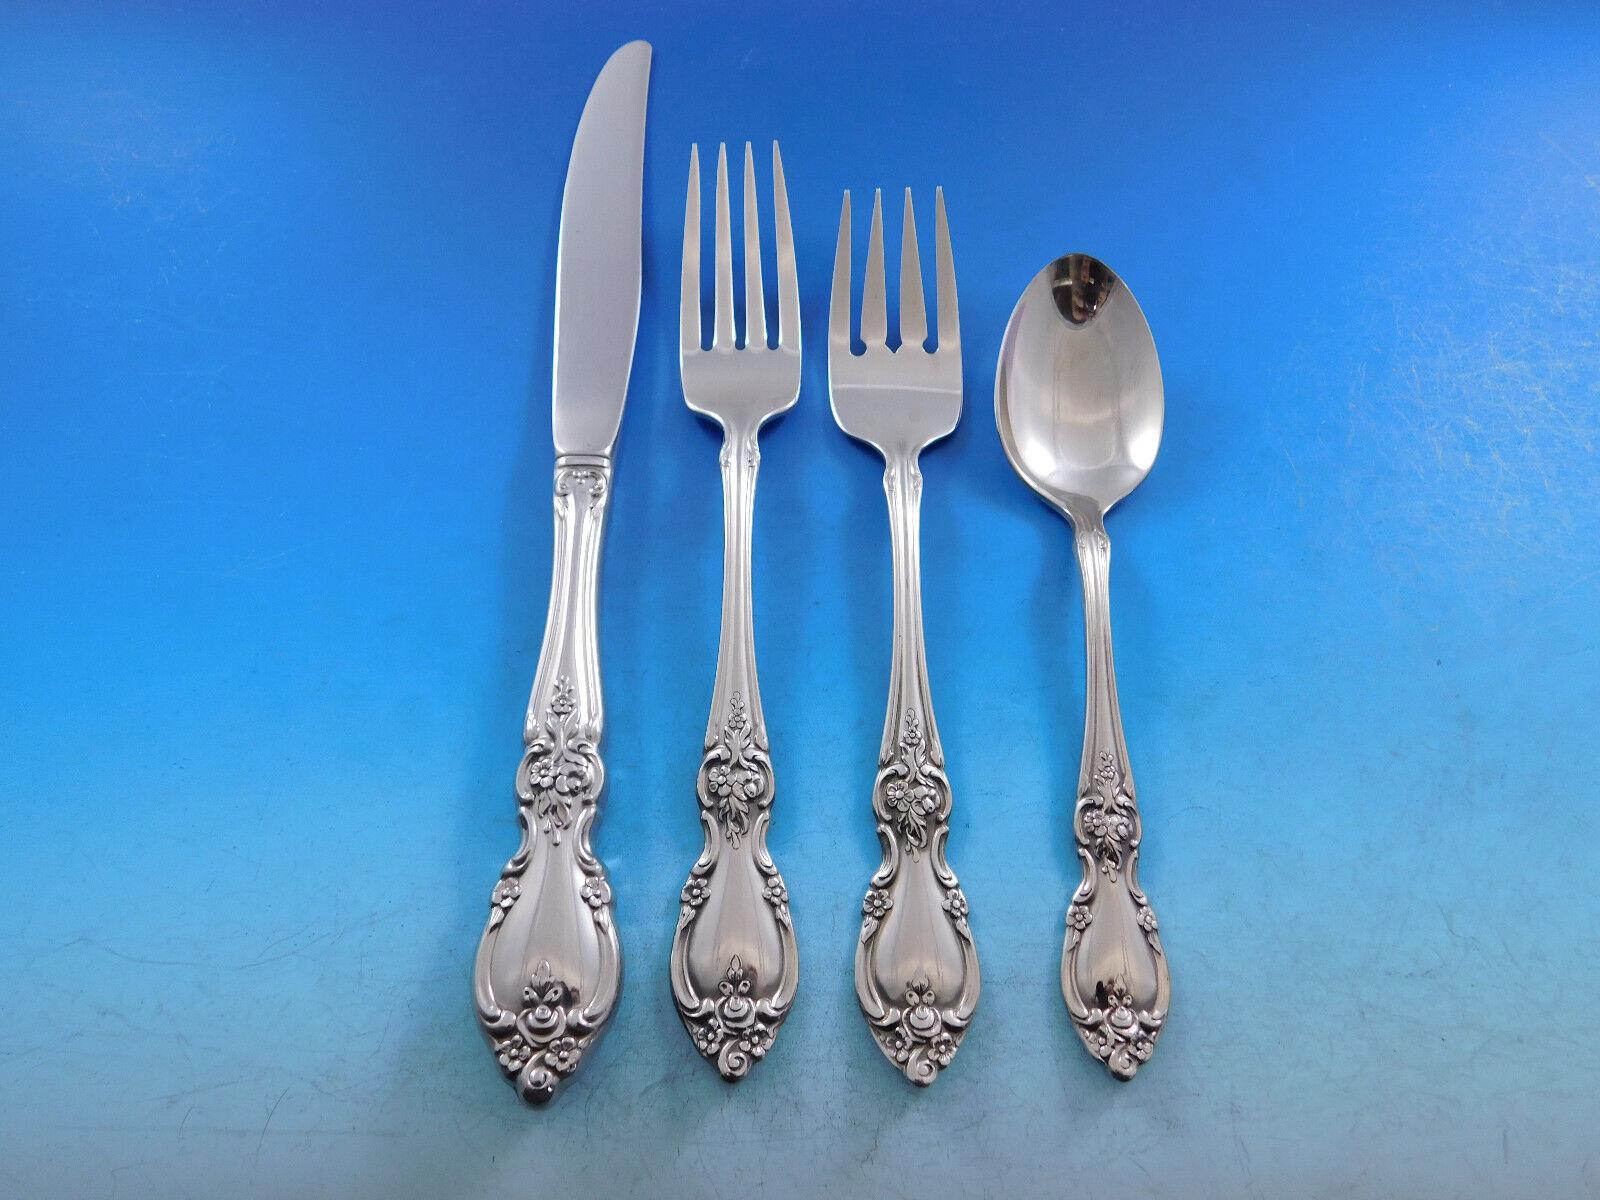 Louisiana by Community Oneida estate Stainless Steel Flatware set - 80 Pieces. This set includes:


12 Knives, 9 1/4